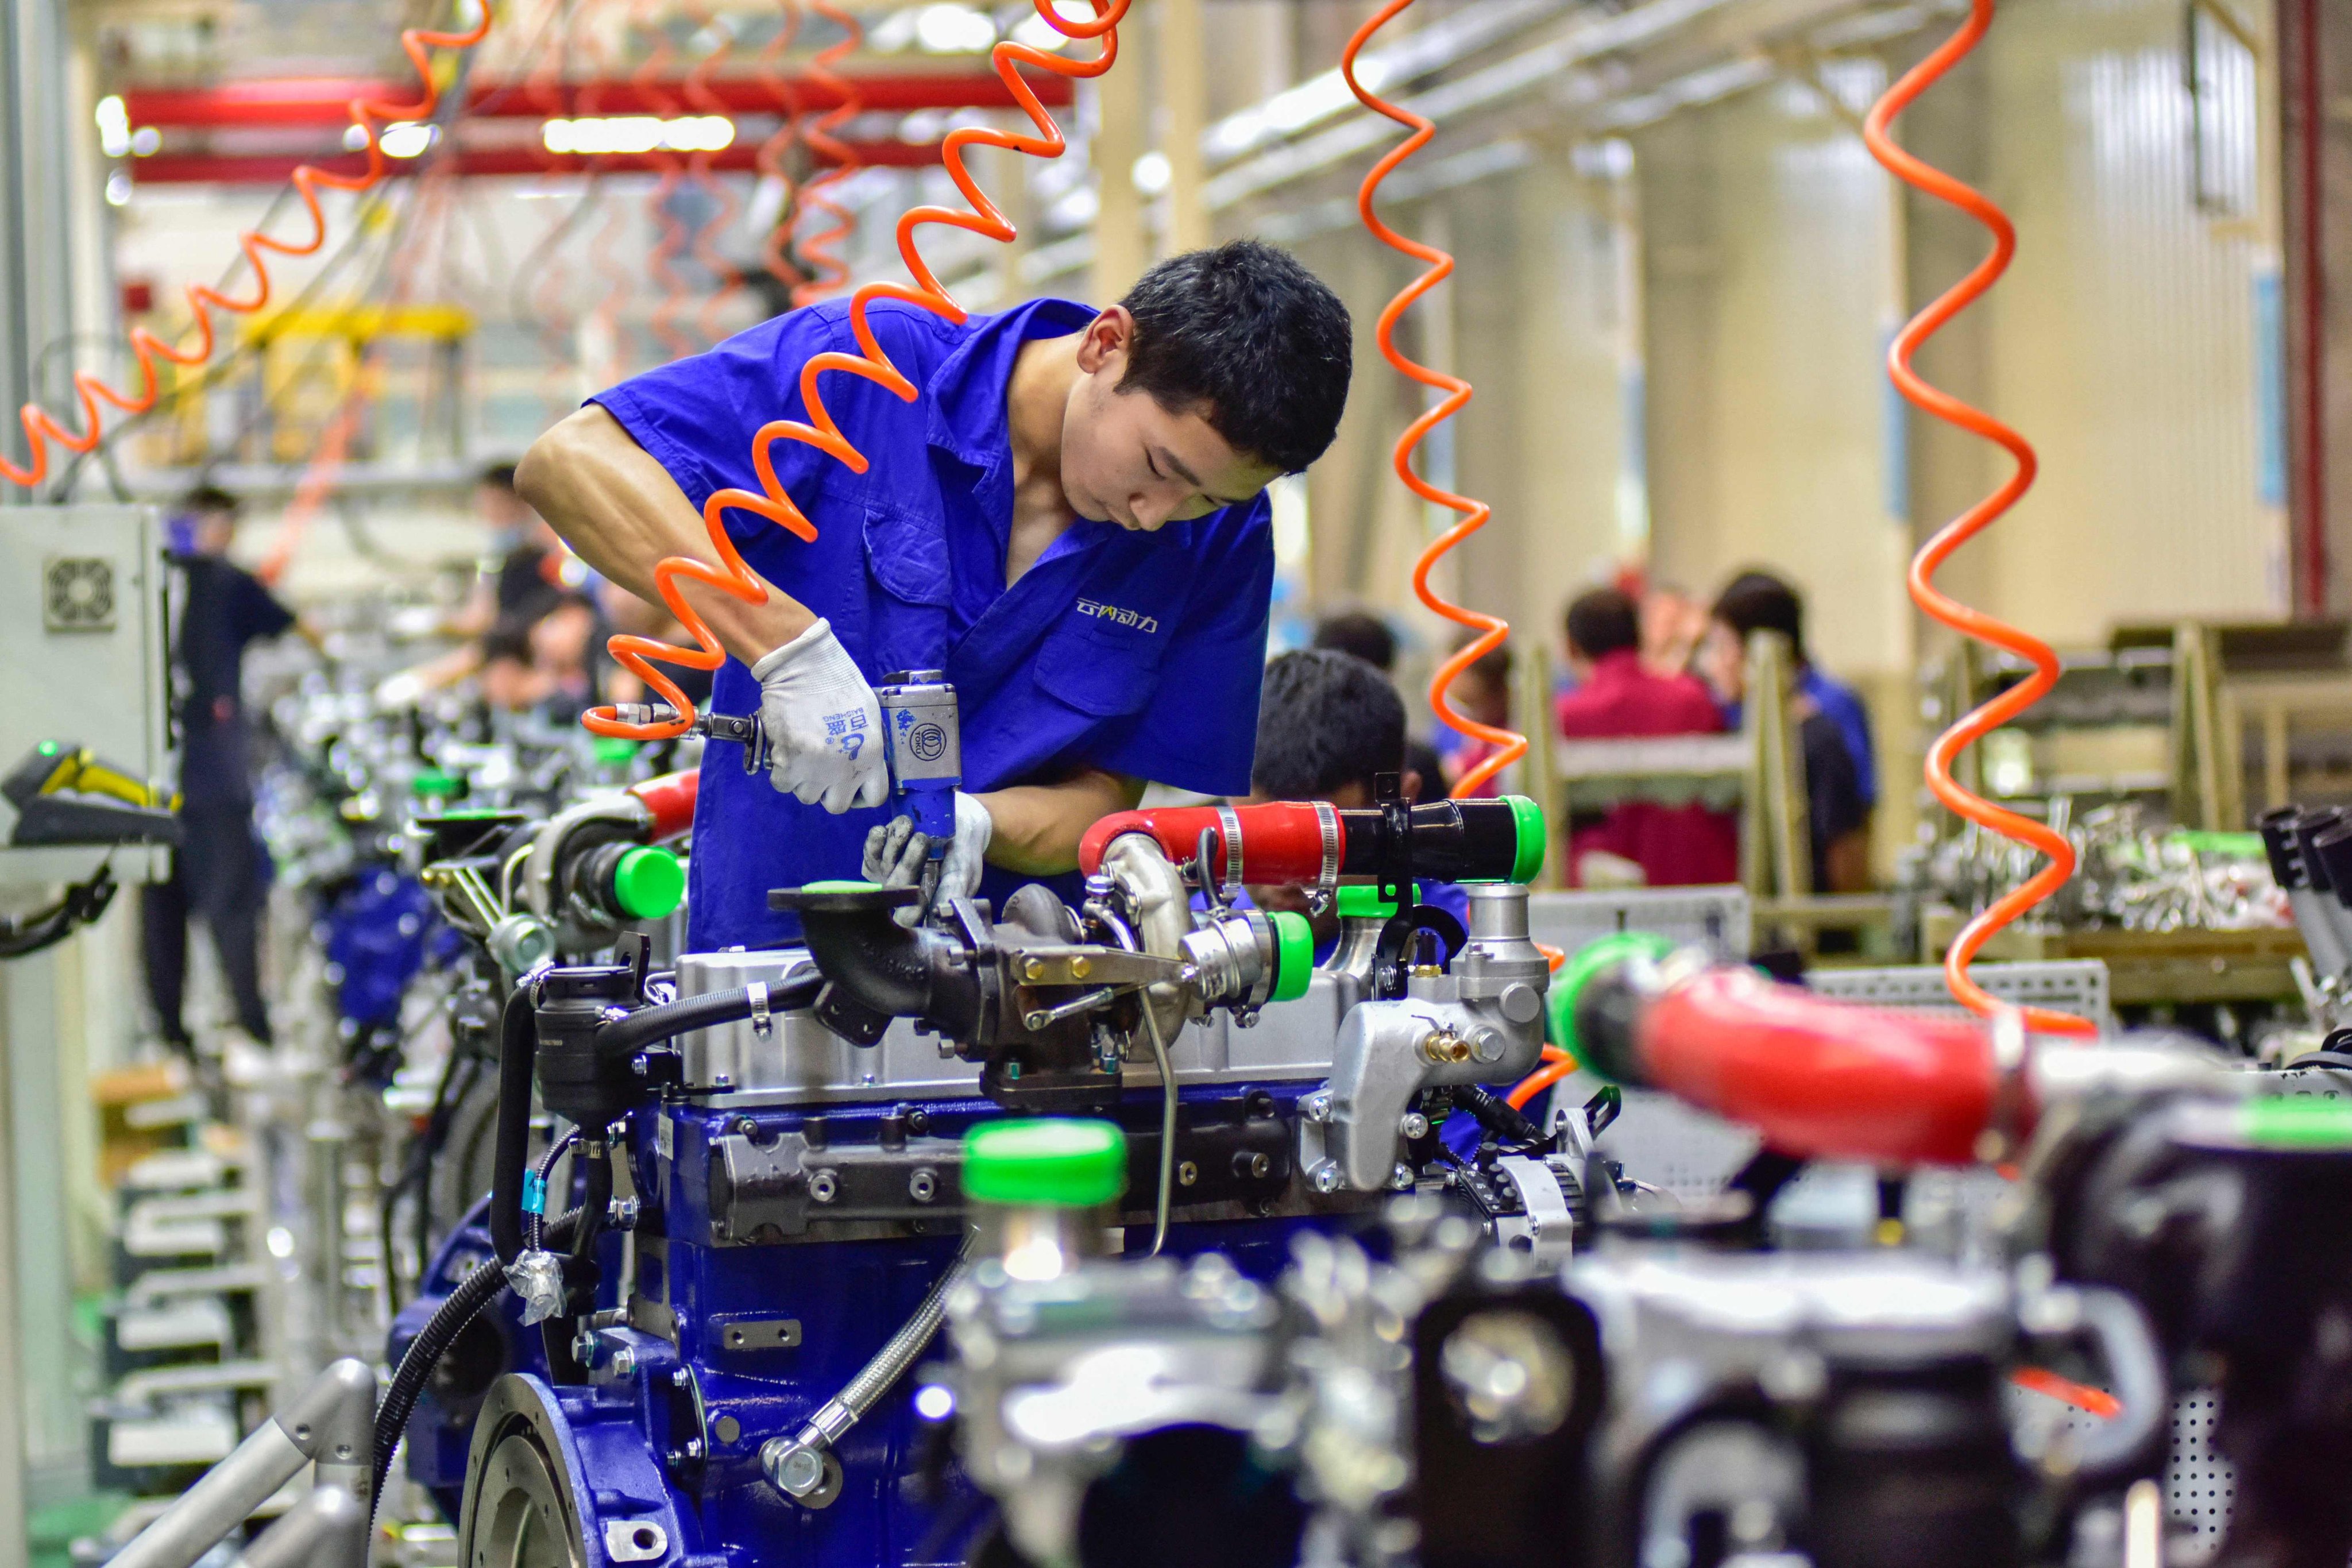 A worker assembling an engine at an engine manufacturing factory in Qingzhou, in China’s eastern Shandong Province. Photo: AFP